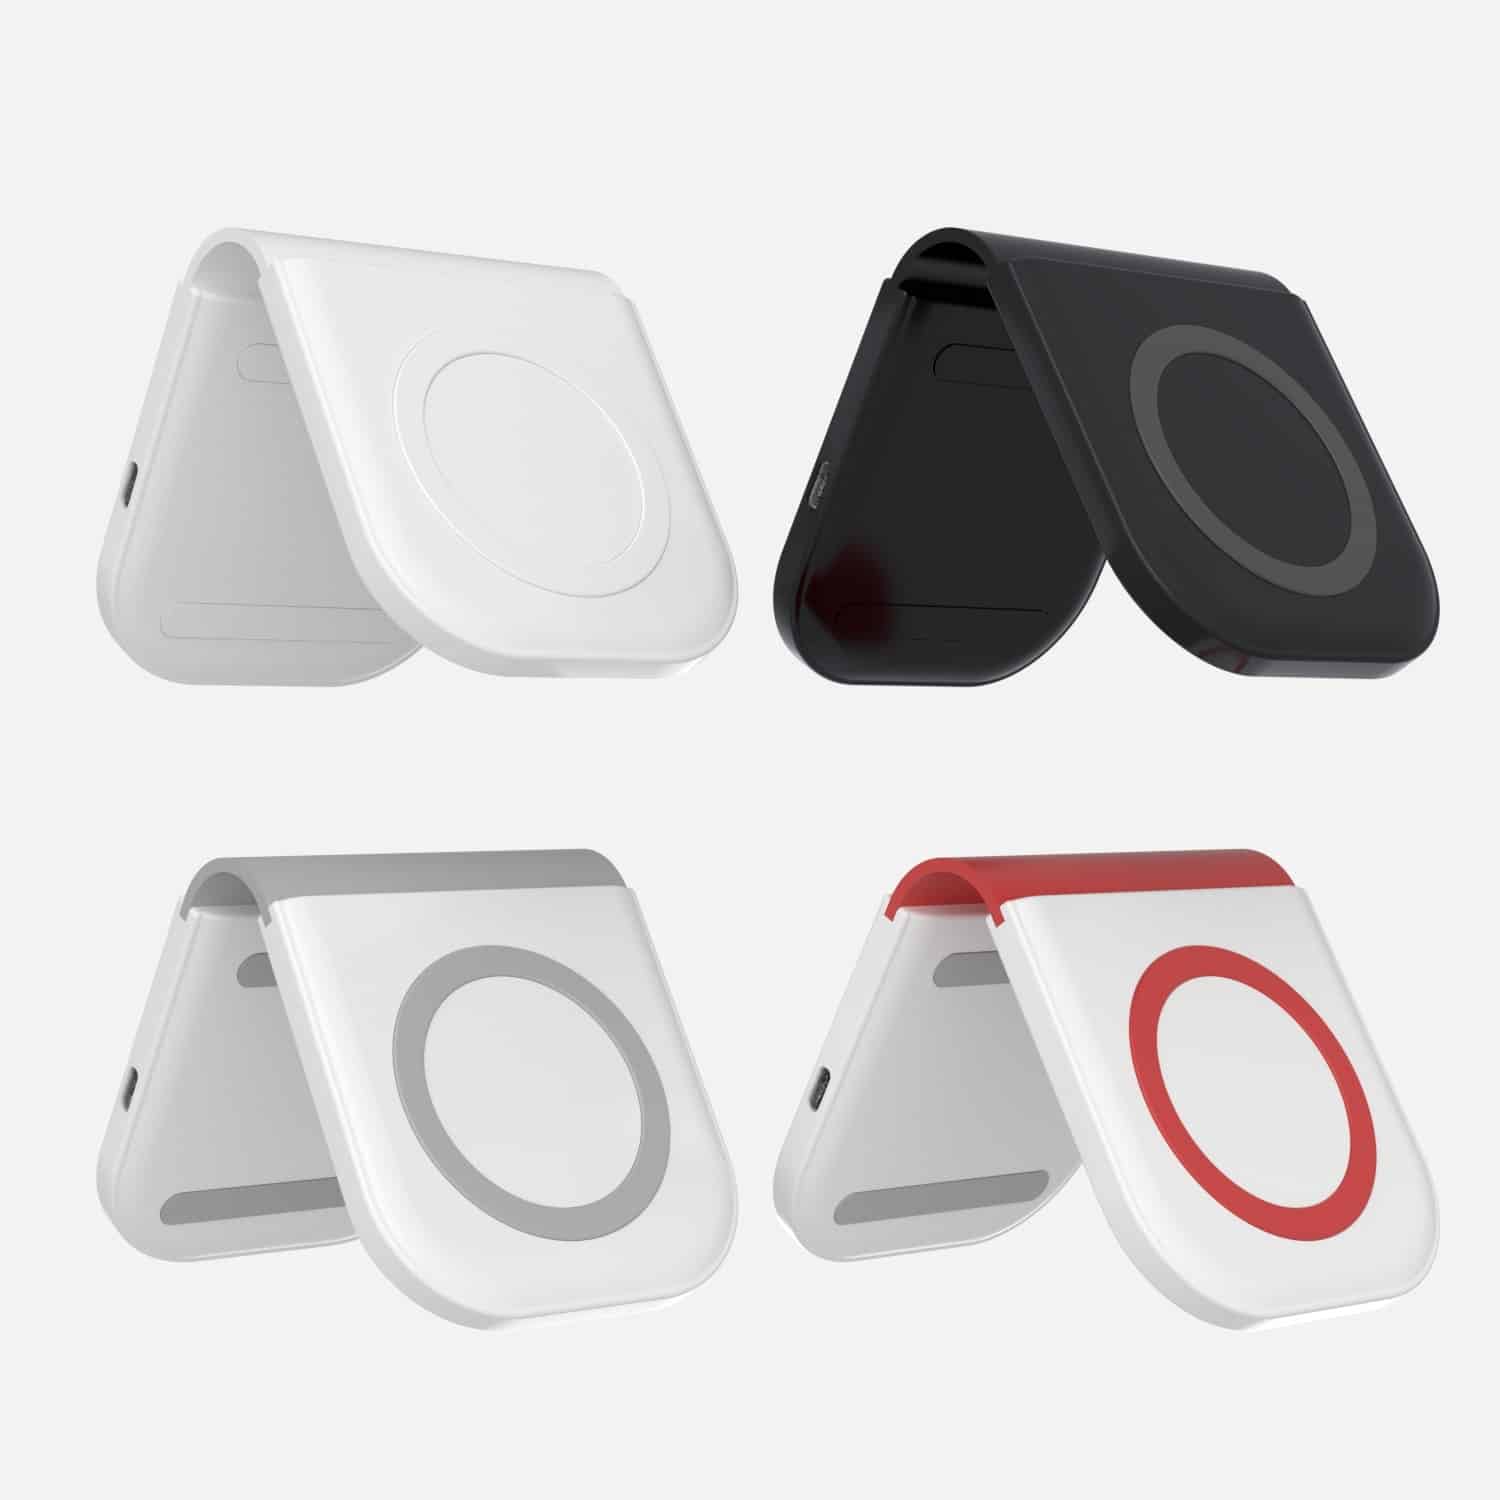 2 In 1 Folding Wireless Charger 15W For iPhone12 12 Pro iWatch airpods For Apple Qi Wireless Charging phone Station Stand